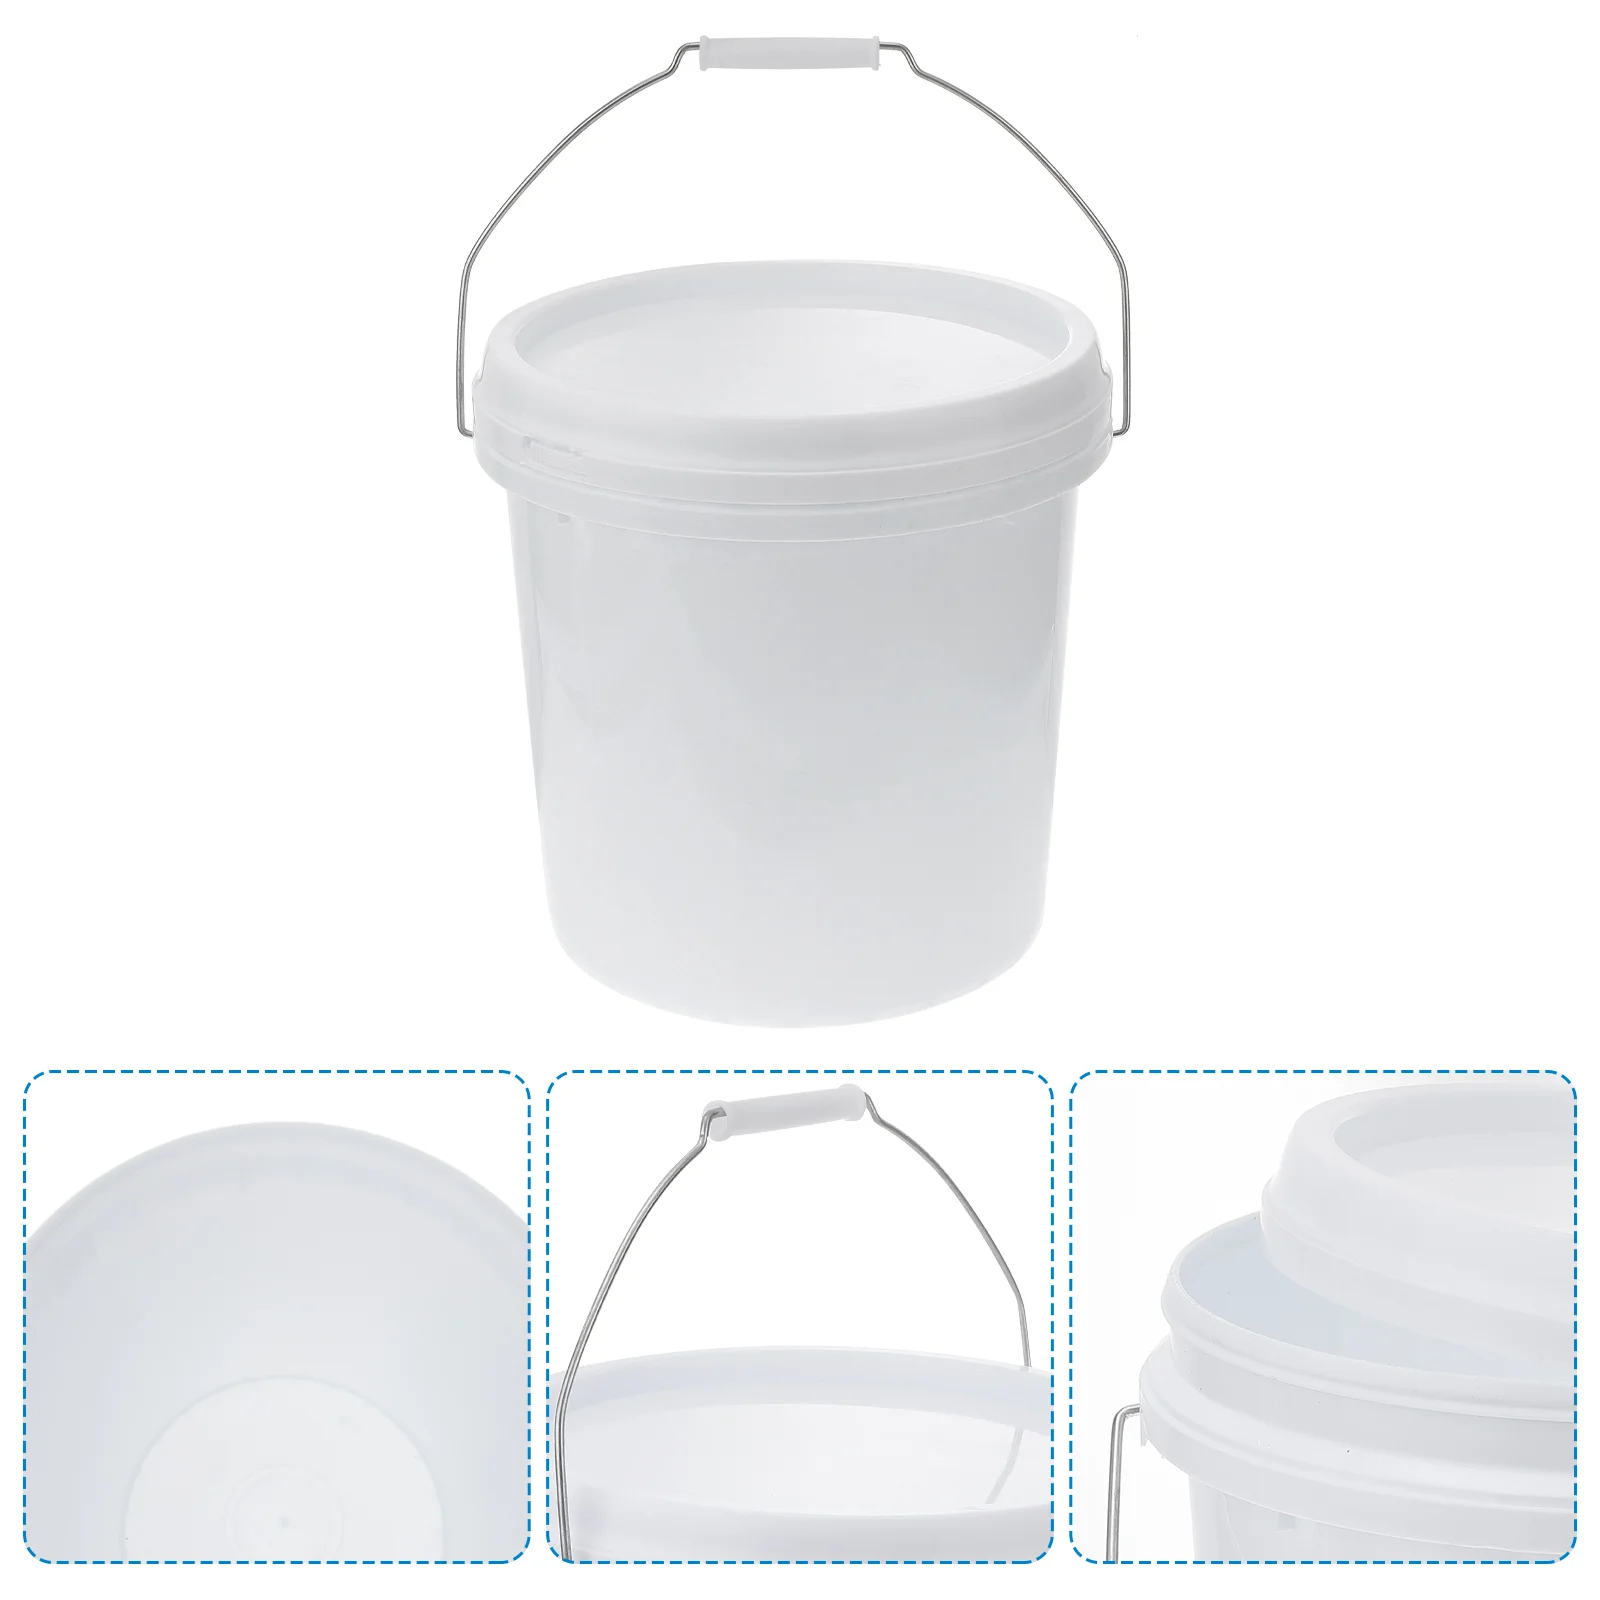 

Bucket Plastic Pail White Buckets Water Gallon Pails Handle Lid Can Ice Storage Industrial Empty Oil Heavy Duty Cans Camping